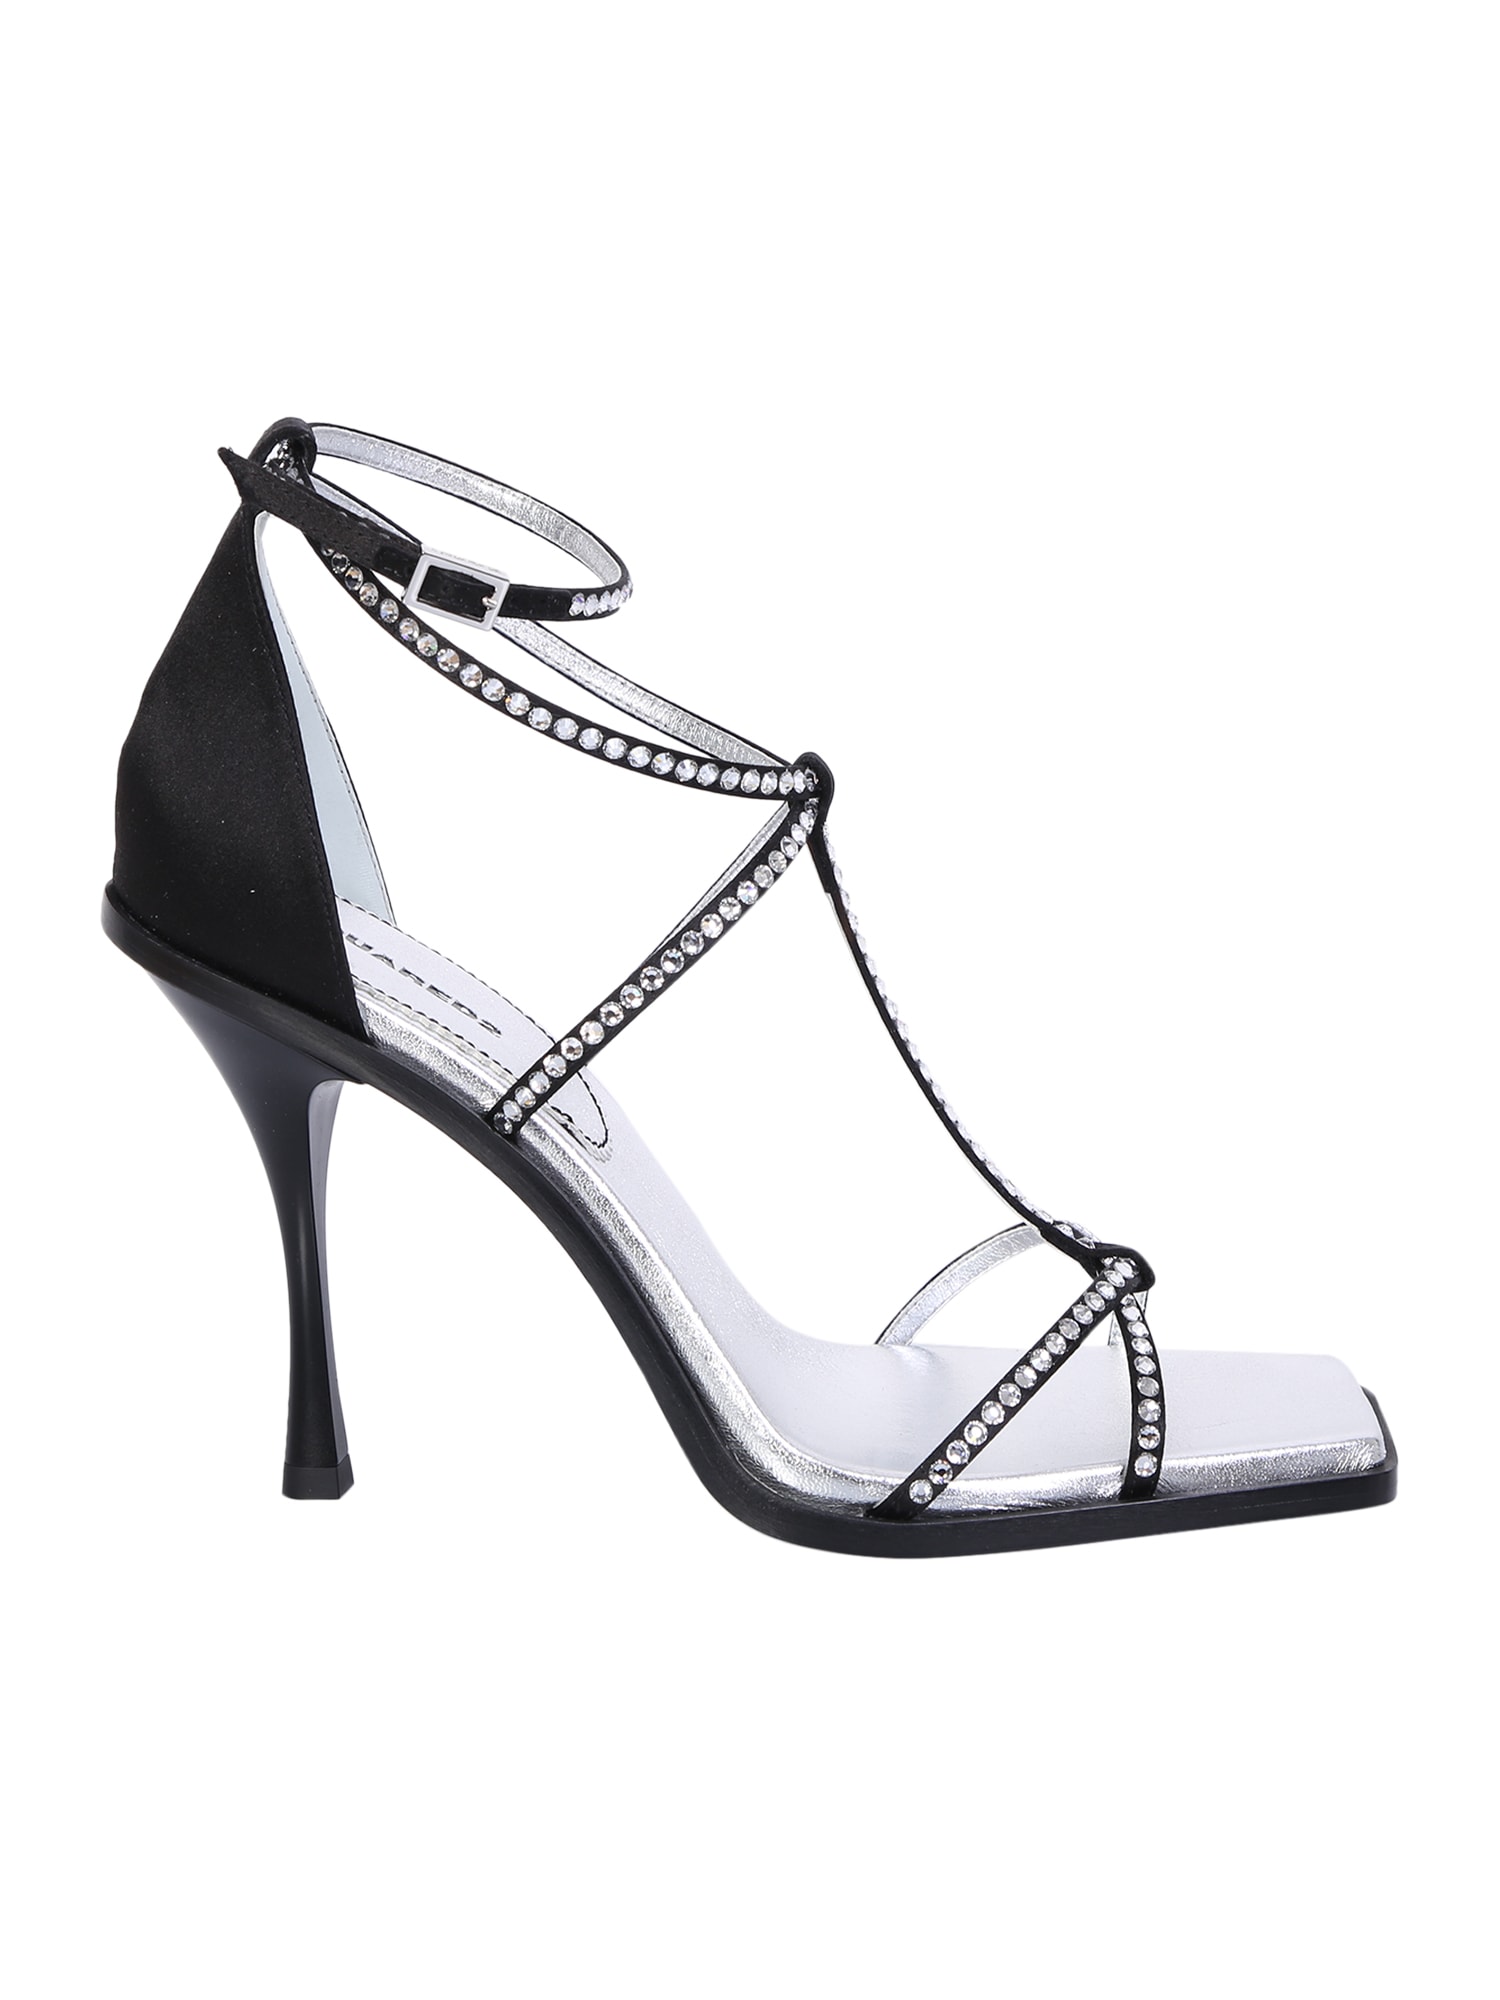 Shop Dsquared2 Holiday Party Black Sandals